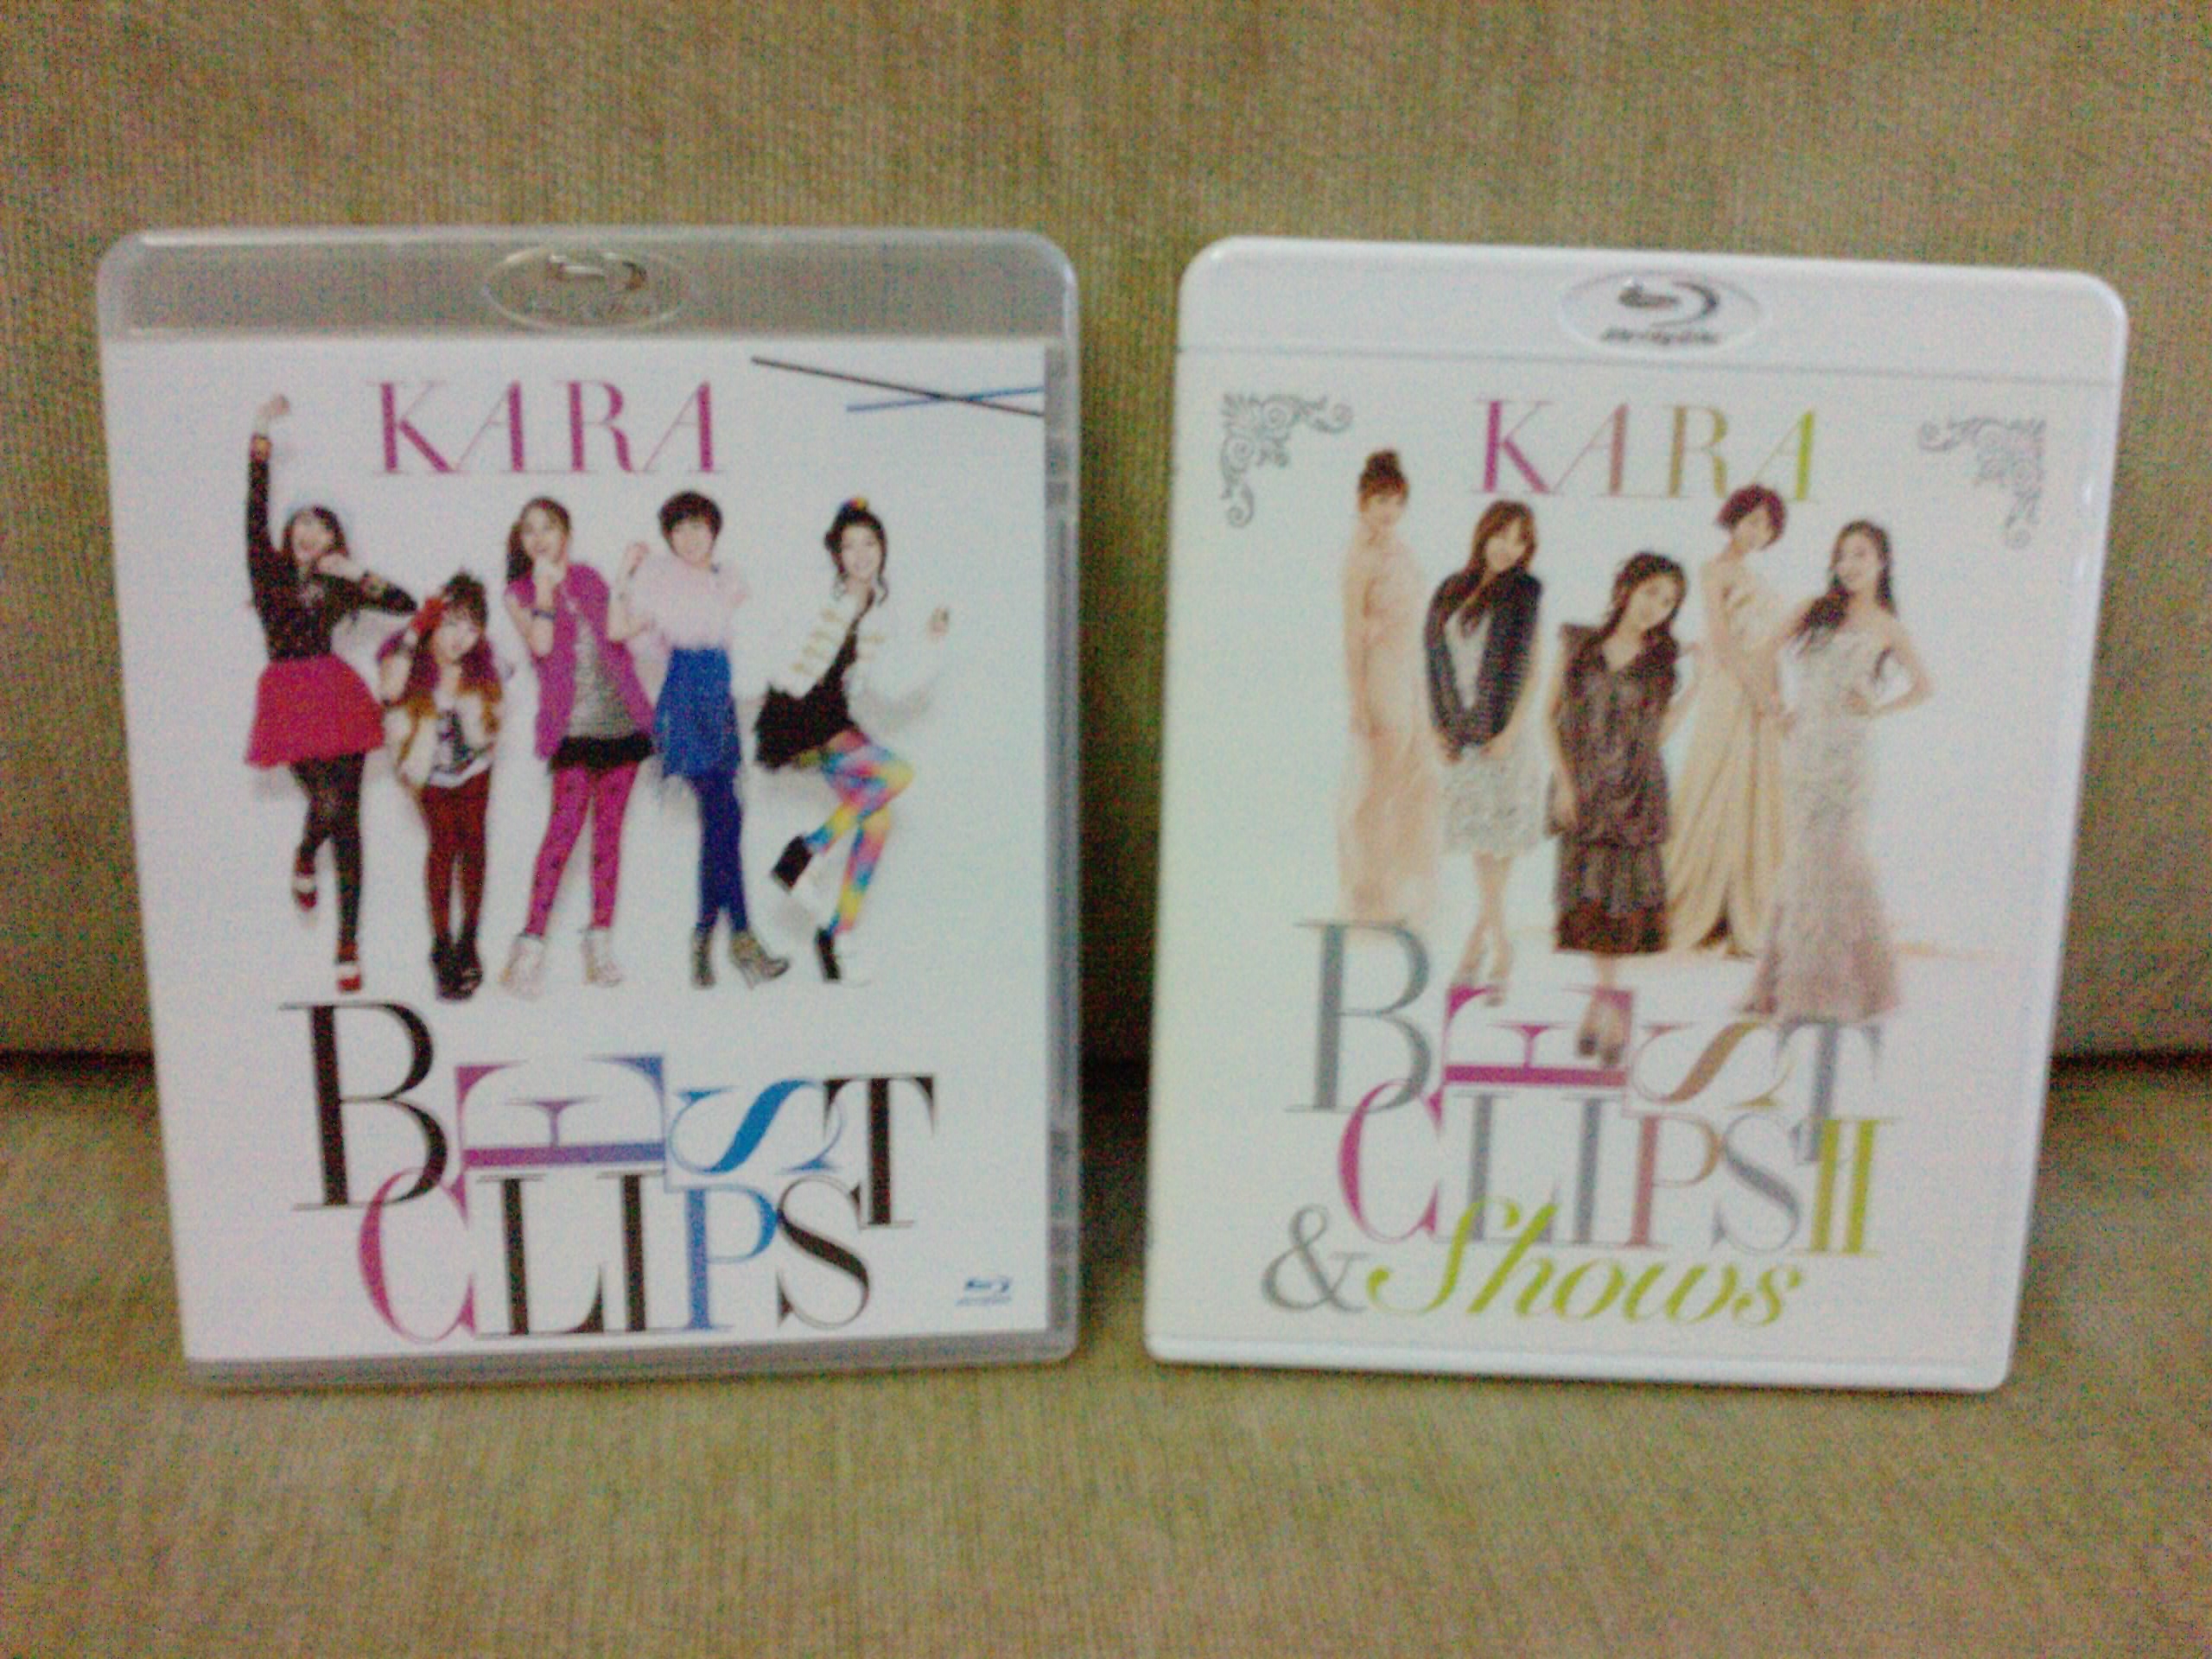 KARA Best Clips 1 & 2 + Shows Blu-ray Unboxing/Review | I Am Ipodman